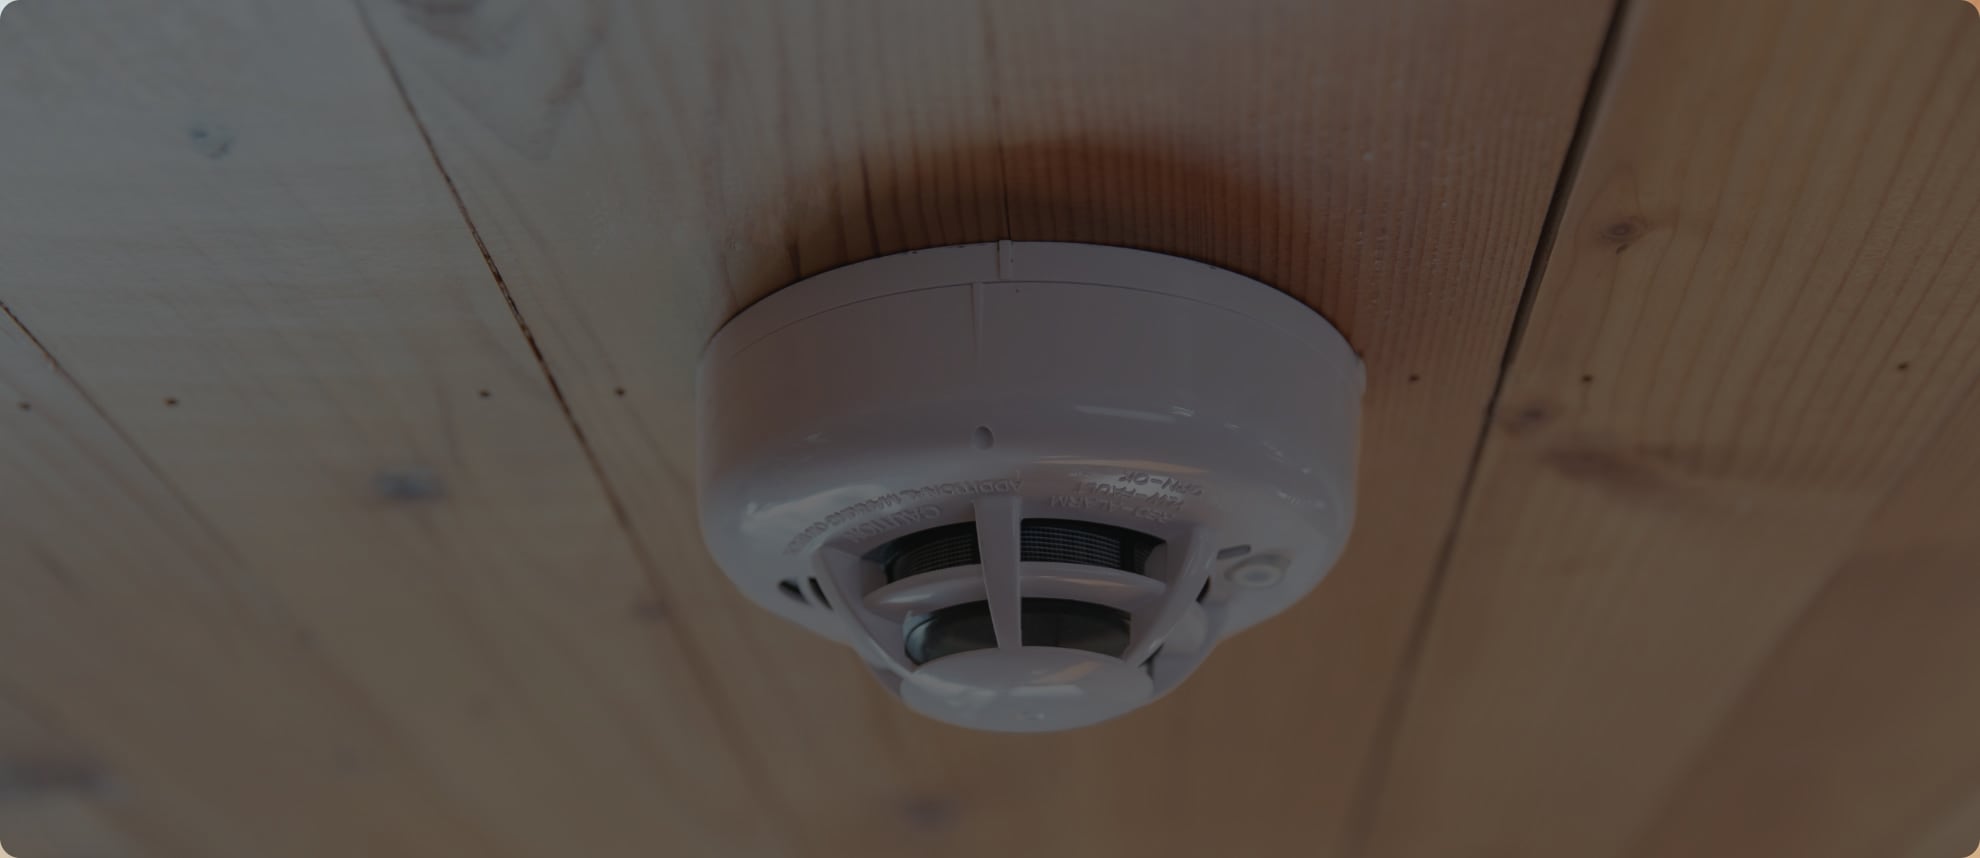 Vivint Monitored Smoke Alarm in Port St. Lucie